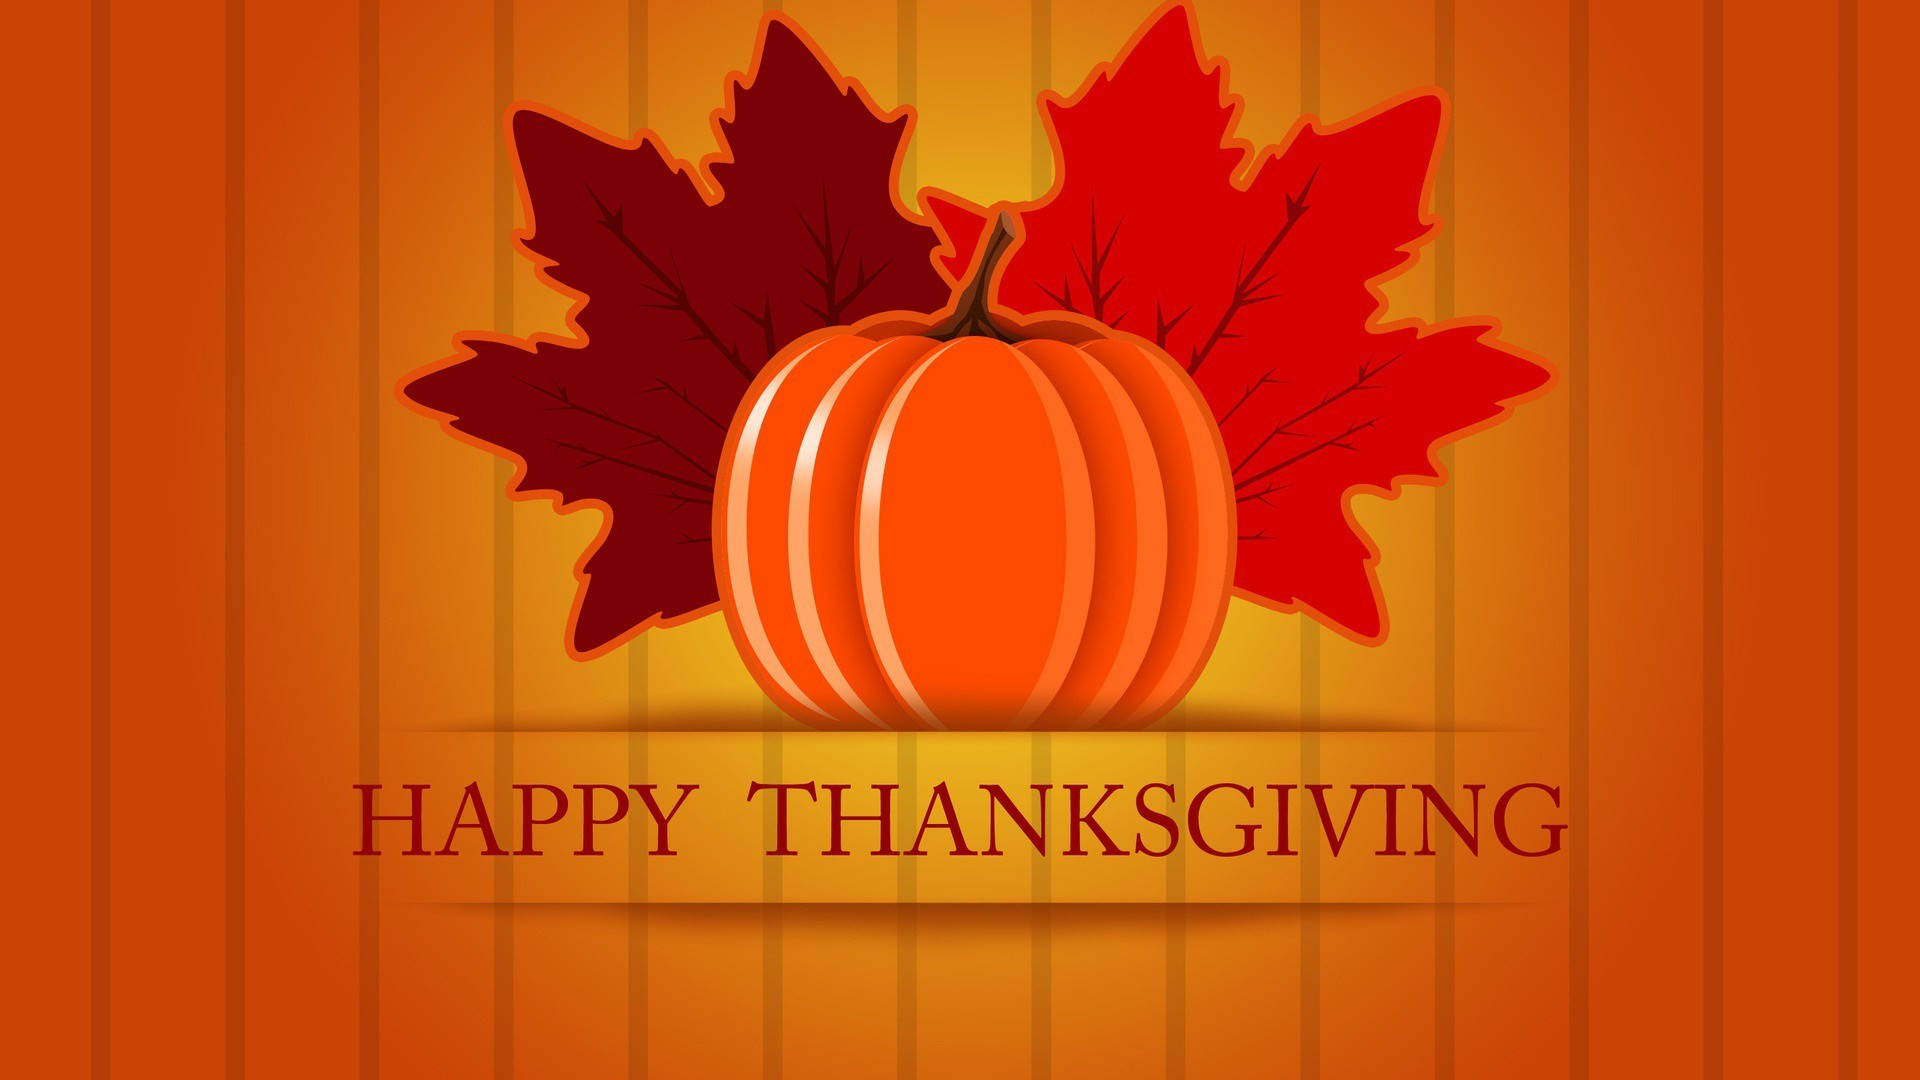 Happy Thanksgiving Day Pumpkin Maple Leaves Background